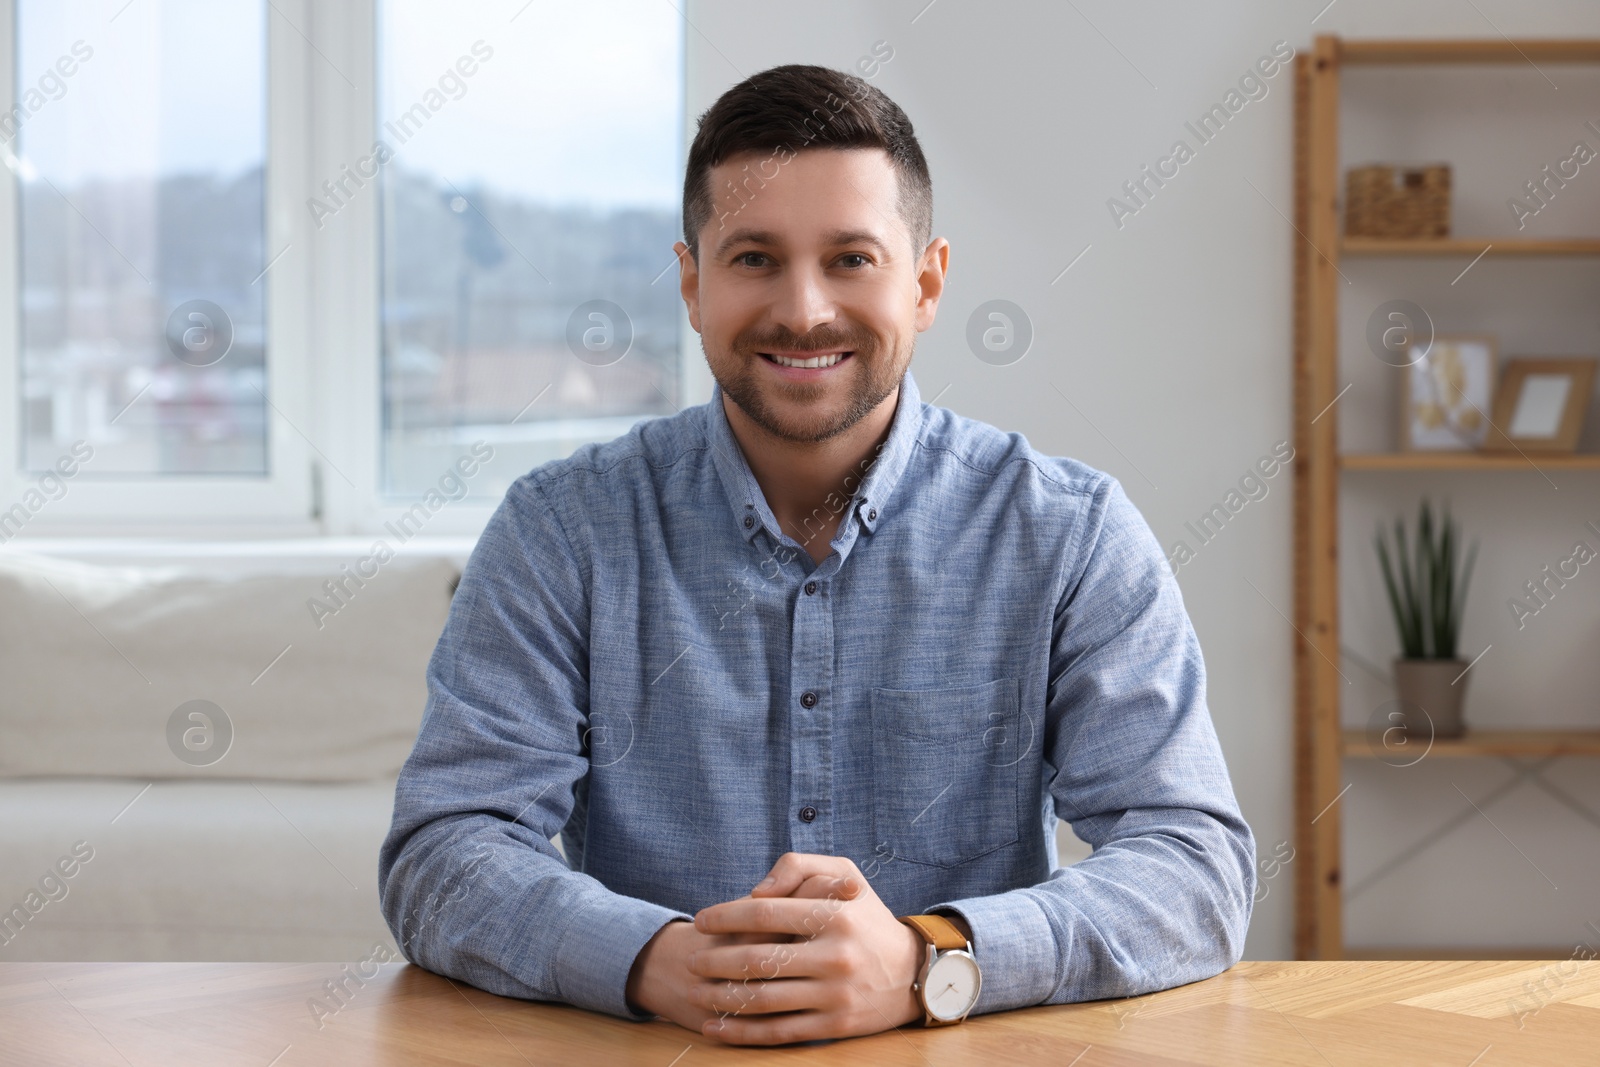 Photo of Happy man having video call at wooden table in room, view from web camera